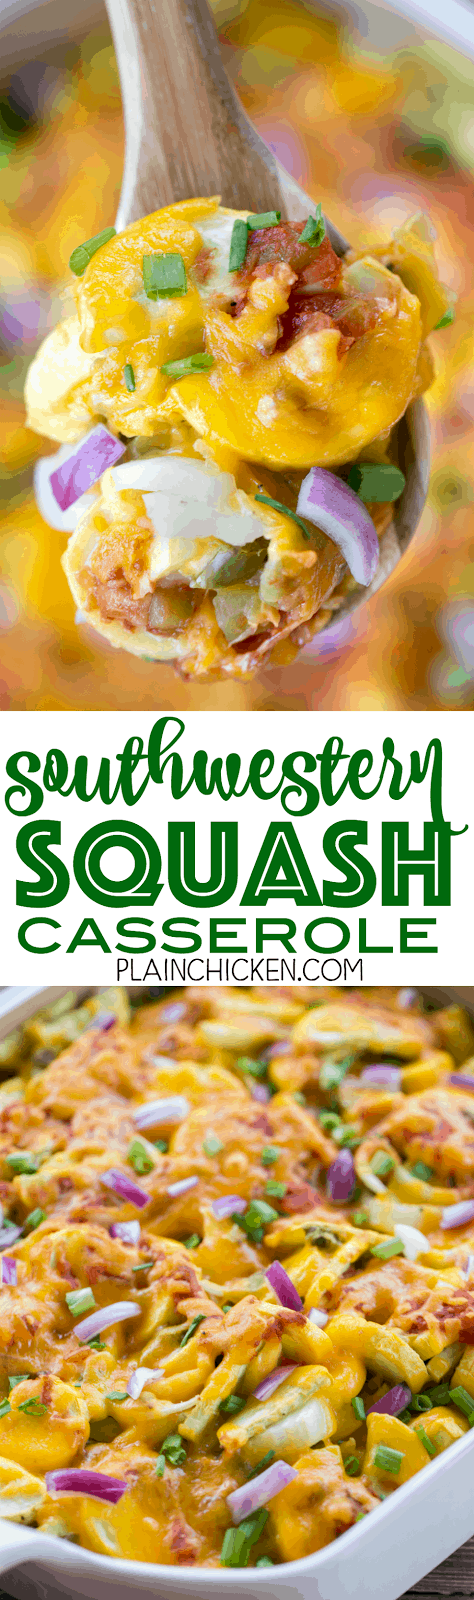 Southwestern Squash Casserole - CRAZY good!!! Great side dish for all your tex-mex dishes!! Squash, cheddar cheese, onion, green chiles, jalapeños, cumin, salsa, green onions, red onion. Everyone loved this easy side dish recipe. Great for a potluck and cookout. 